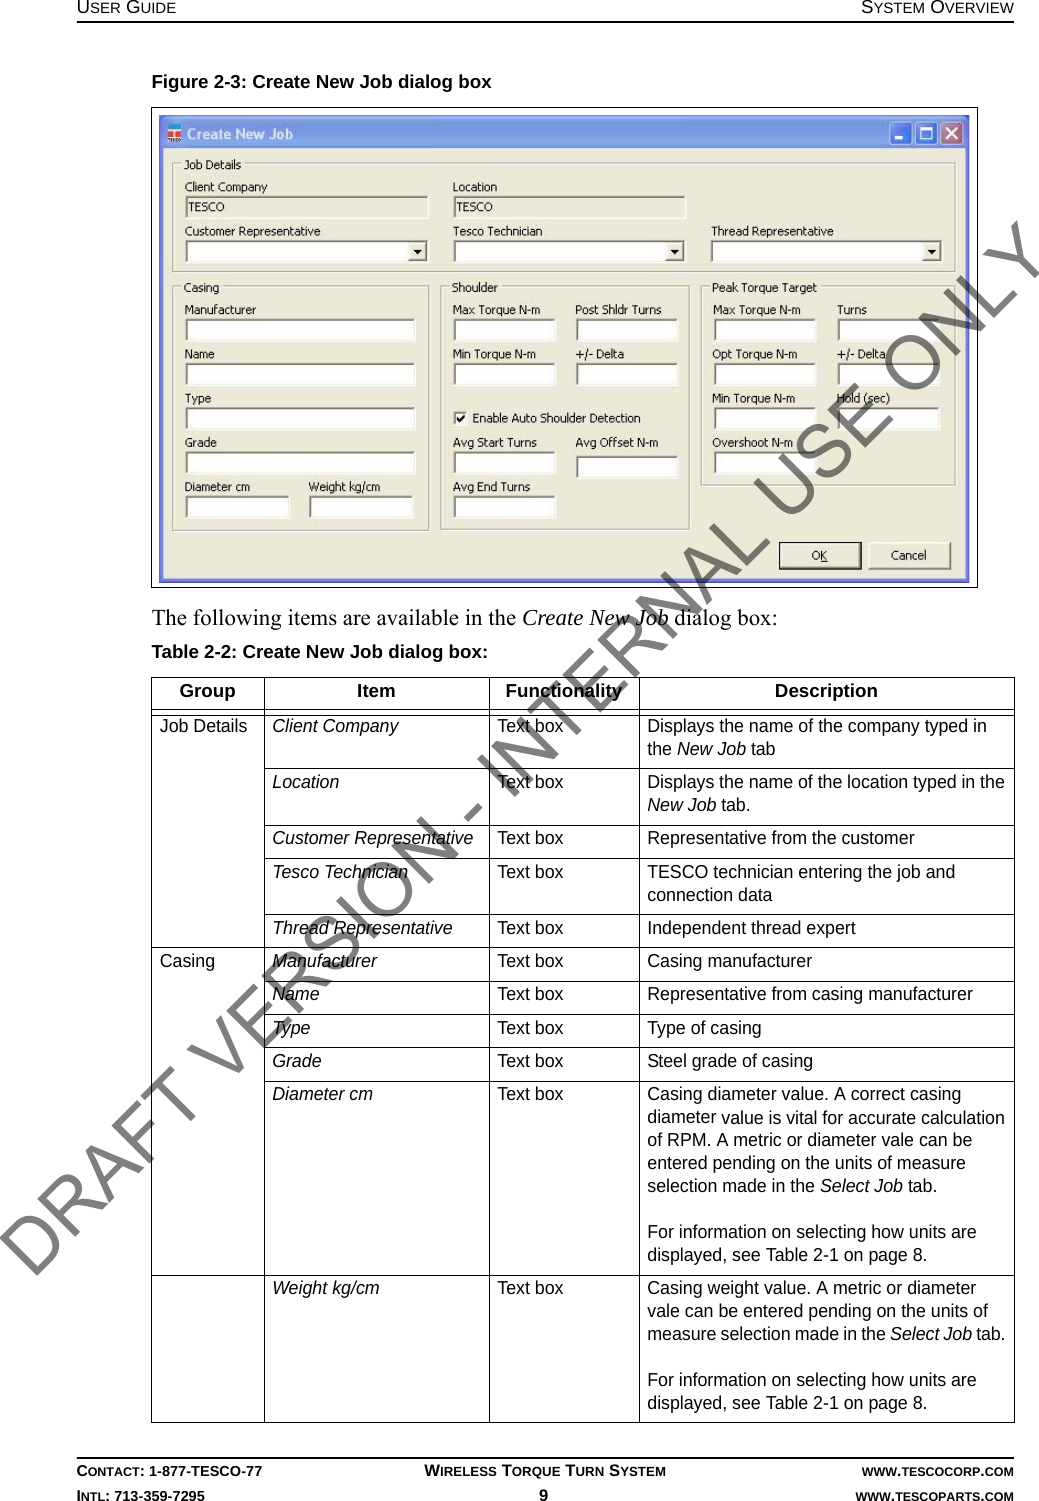 USER GUIDE SYSTEM OVERVIEWCONTACT: 1-877-TESCO-77 WIRELESS TORQUE TURN SYSTEM WWW.TESCOCORP.COMINTL: 713-359-7295 9   WWW.TESCOPARTS.COMThe following items are available in the Create New Job dialog box:Figure 2-3: Create New Job dialog boxTable 2-2: Create New Job dialog box:Group Item Functionality DescriptionJob Details Client Company  Text box Displays the name of the company typed in the New Job tabLocation  Text box Displays the name of the location typed in the New Job tab.Customer Representative  Text box Representative from the customer Tesco Technician Text box TESCO technician entering the job and connection dataThread Representative Text box Independent thread expertCasing Manufacturer Text box Casing manufacturerName Text box Representative from casing manufacturerType Text box Type of casingGrade Text box Steel grade of casingDiameter cm Text box Casing diameter value. A correct casing diameter value is vital for accurate calculation of RPM. A metric or diameter vale can be entered pending on the units of measure selection made in the Select Job tab. For information on selecting how units are displayed, see Table 2-1 on page 8.Weight kg/cm Text box Casing weight value. A metric or diameter vale can be entered pending on the units of measure selection made in the Select Job tab. For information on selecting how units are displayed, see Table 2-1 on page 8.DRAFT VERSION - INTERNAL USE ONLY